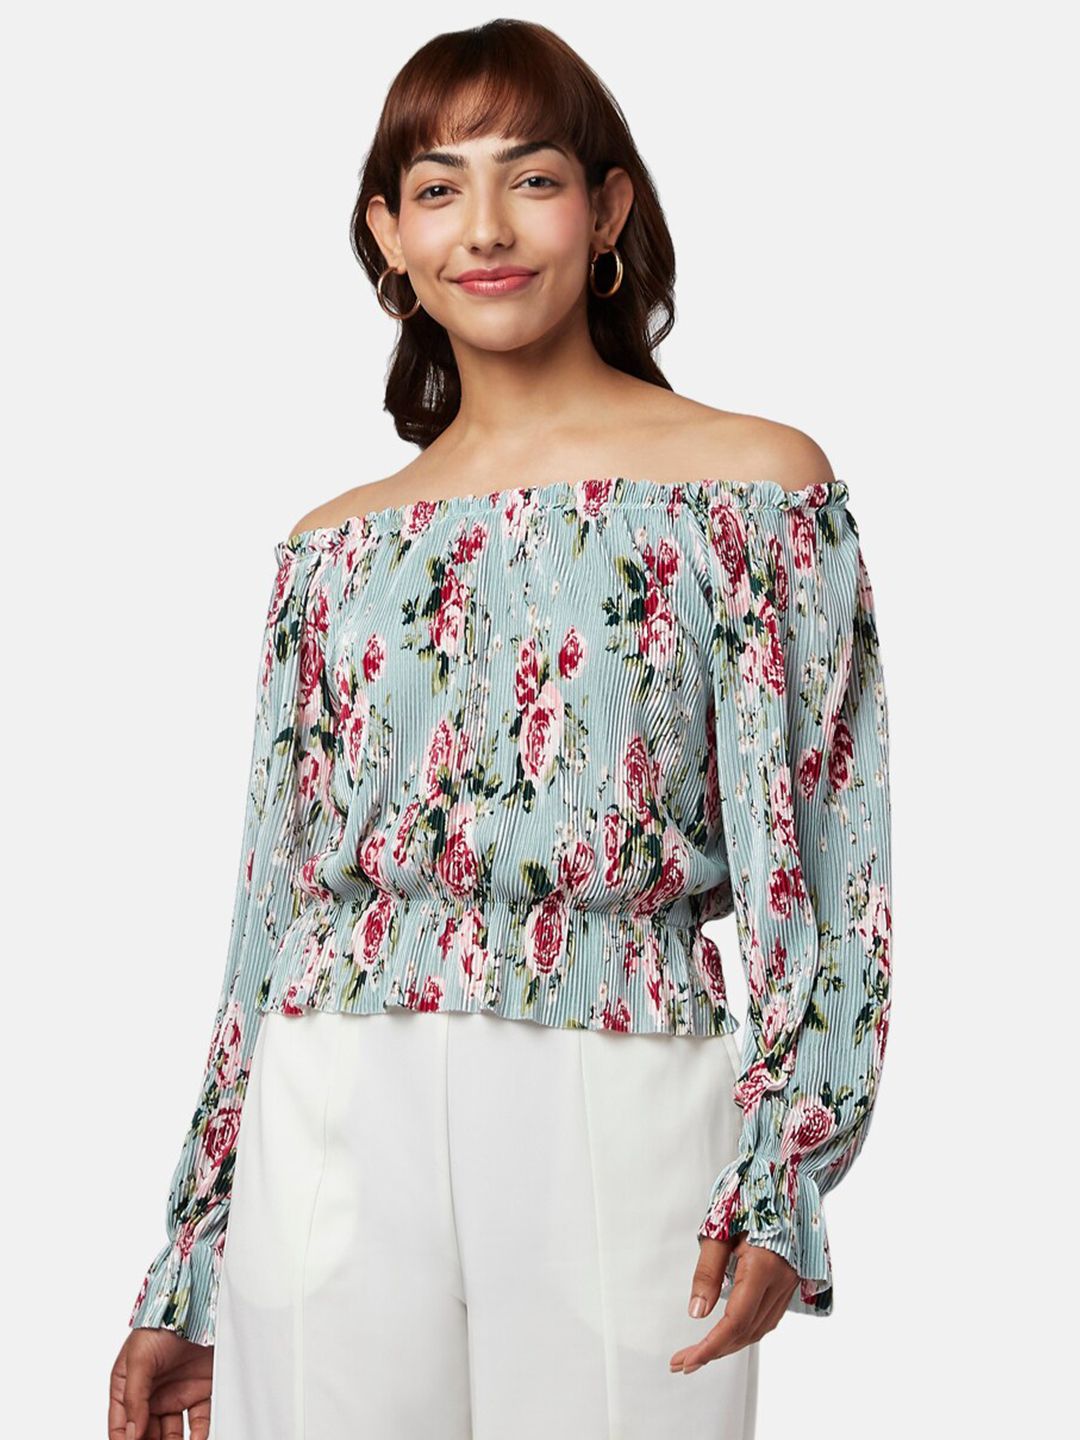 Honey by Pantaloons Blue Floral Print Off-Shoulder Bardot Top Price in India